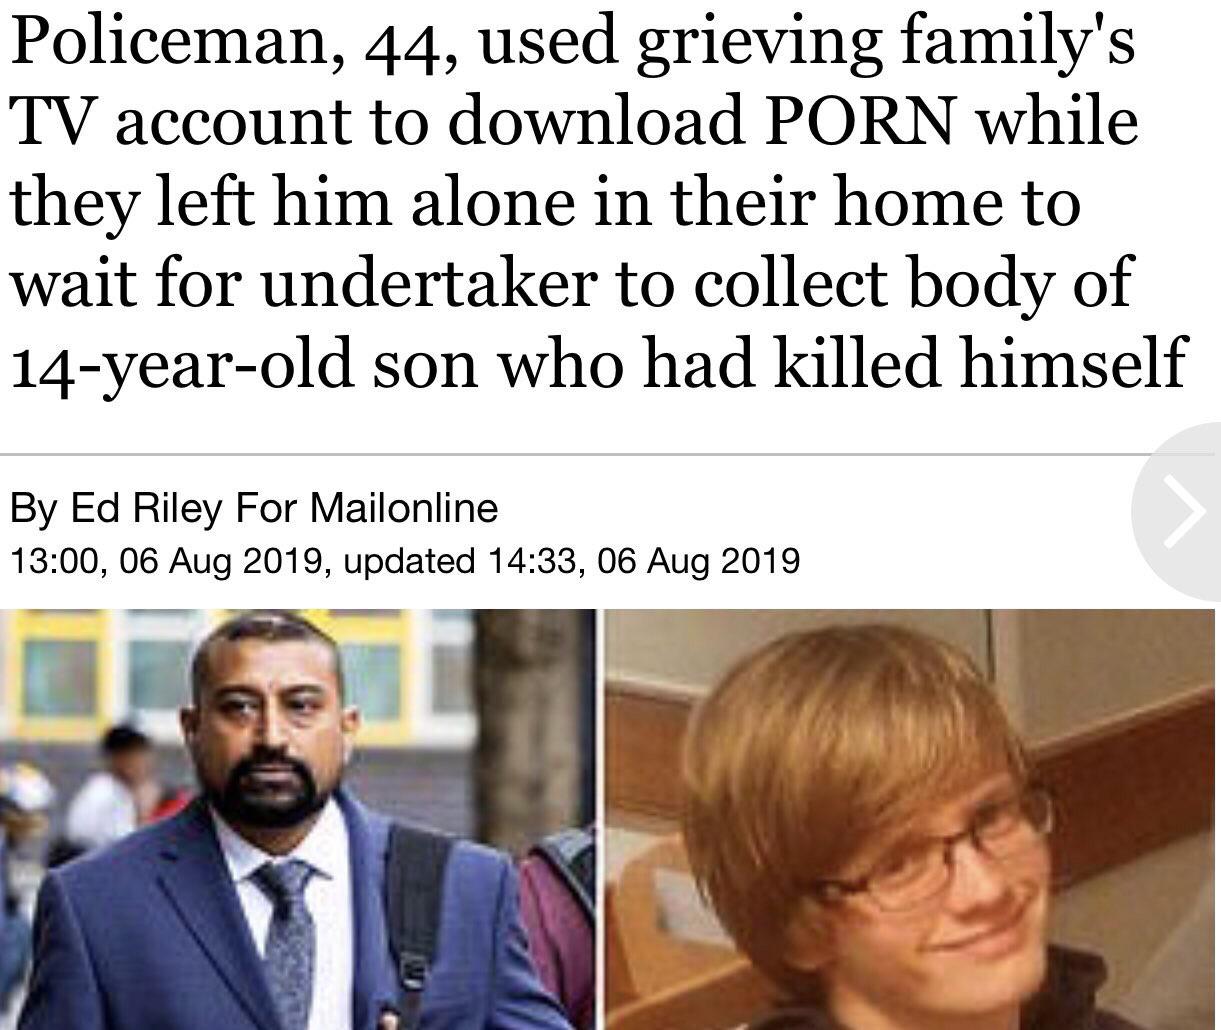 human behavior - Policeman, 44, used grieving family's Tv account to download Porn while they left him alone in their home to wait for undertaker to collect body of 14yearold son who had killed himself By Ed Riley For Mailonline , , updated ,